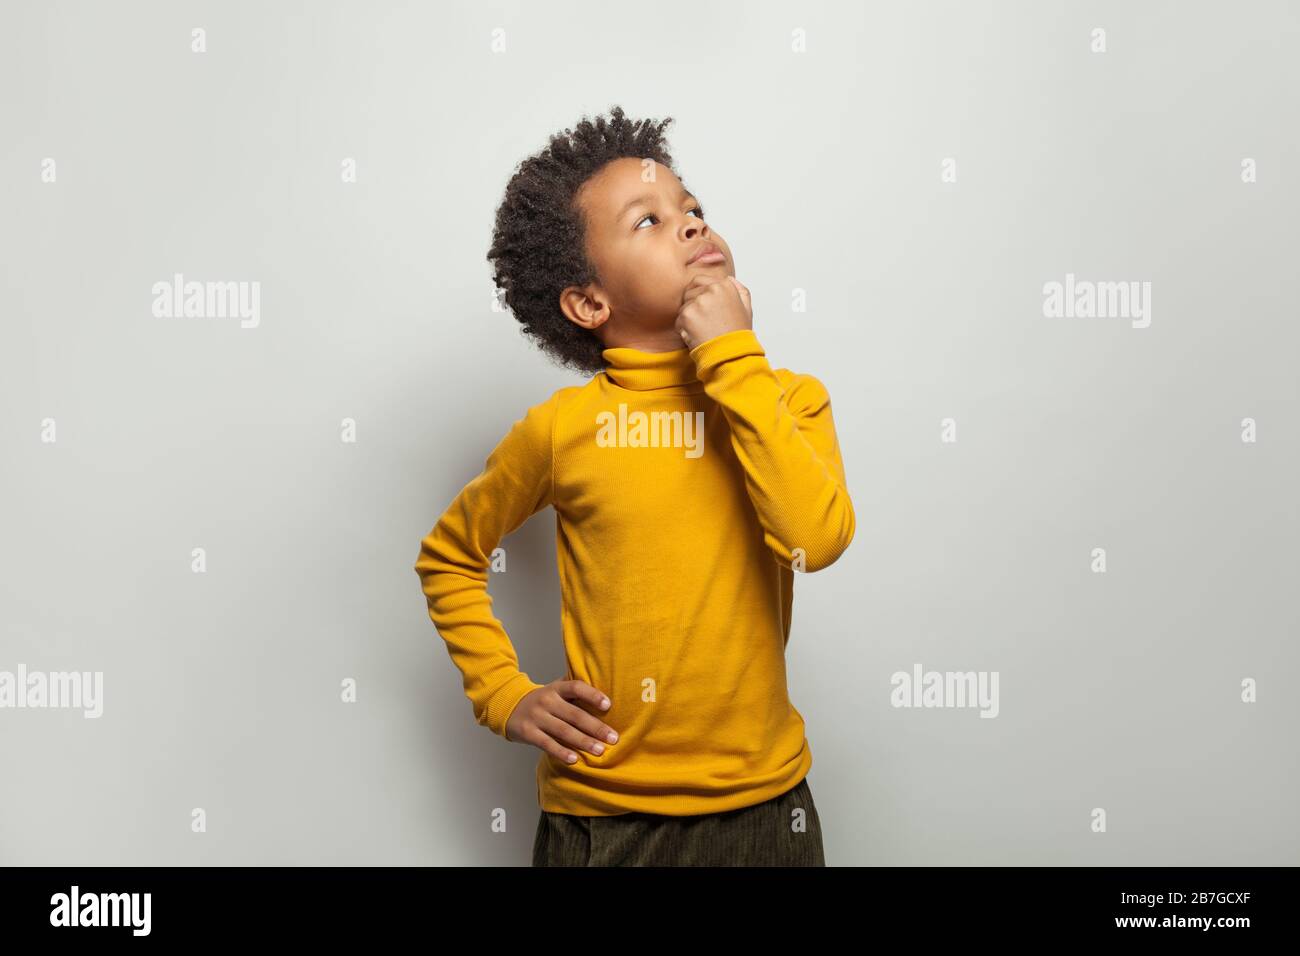 Curious black child looking up on white background Stock Photo